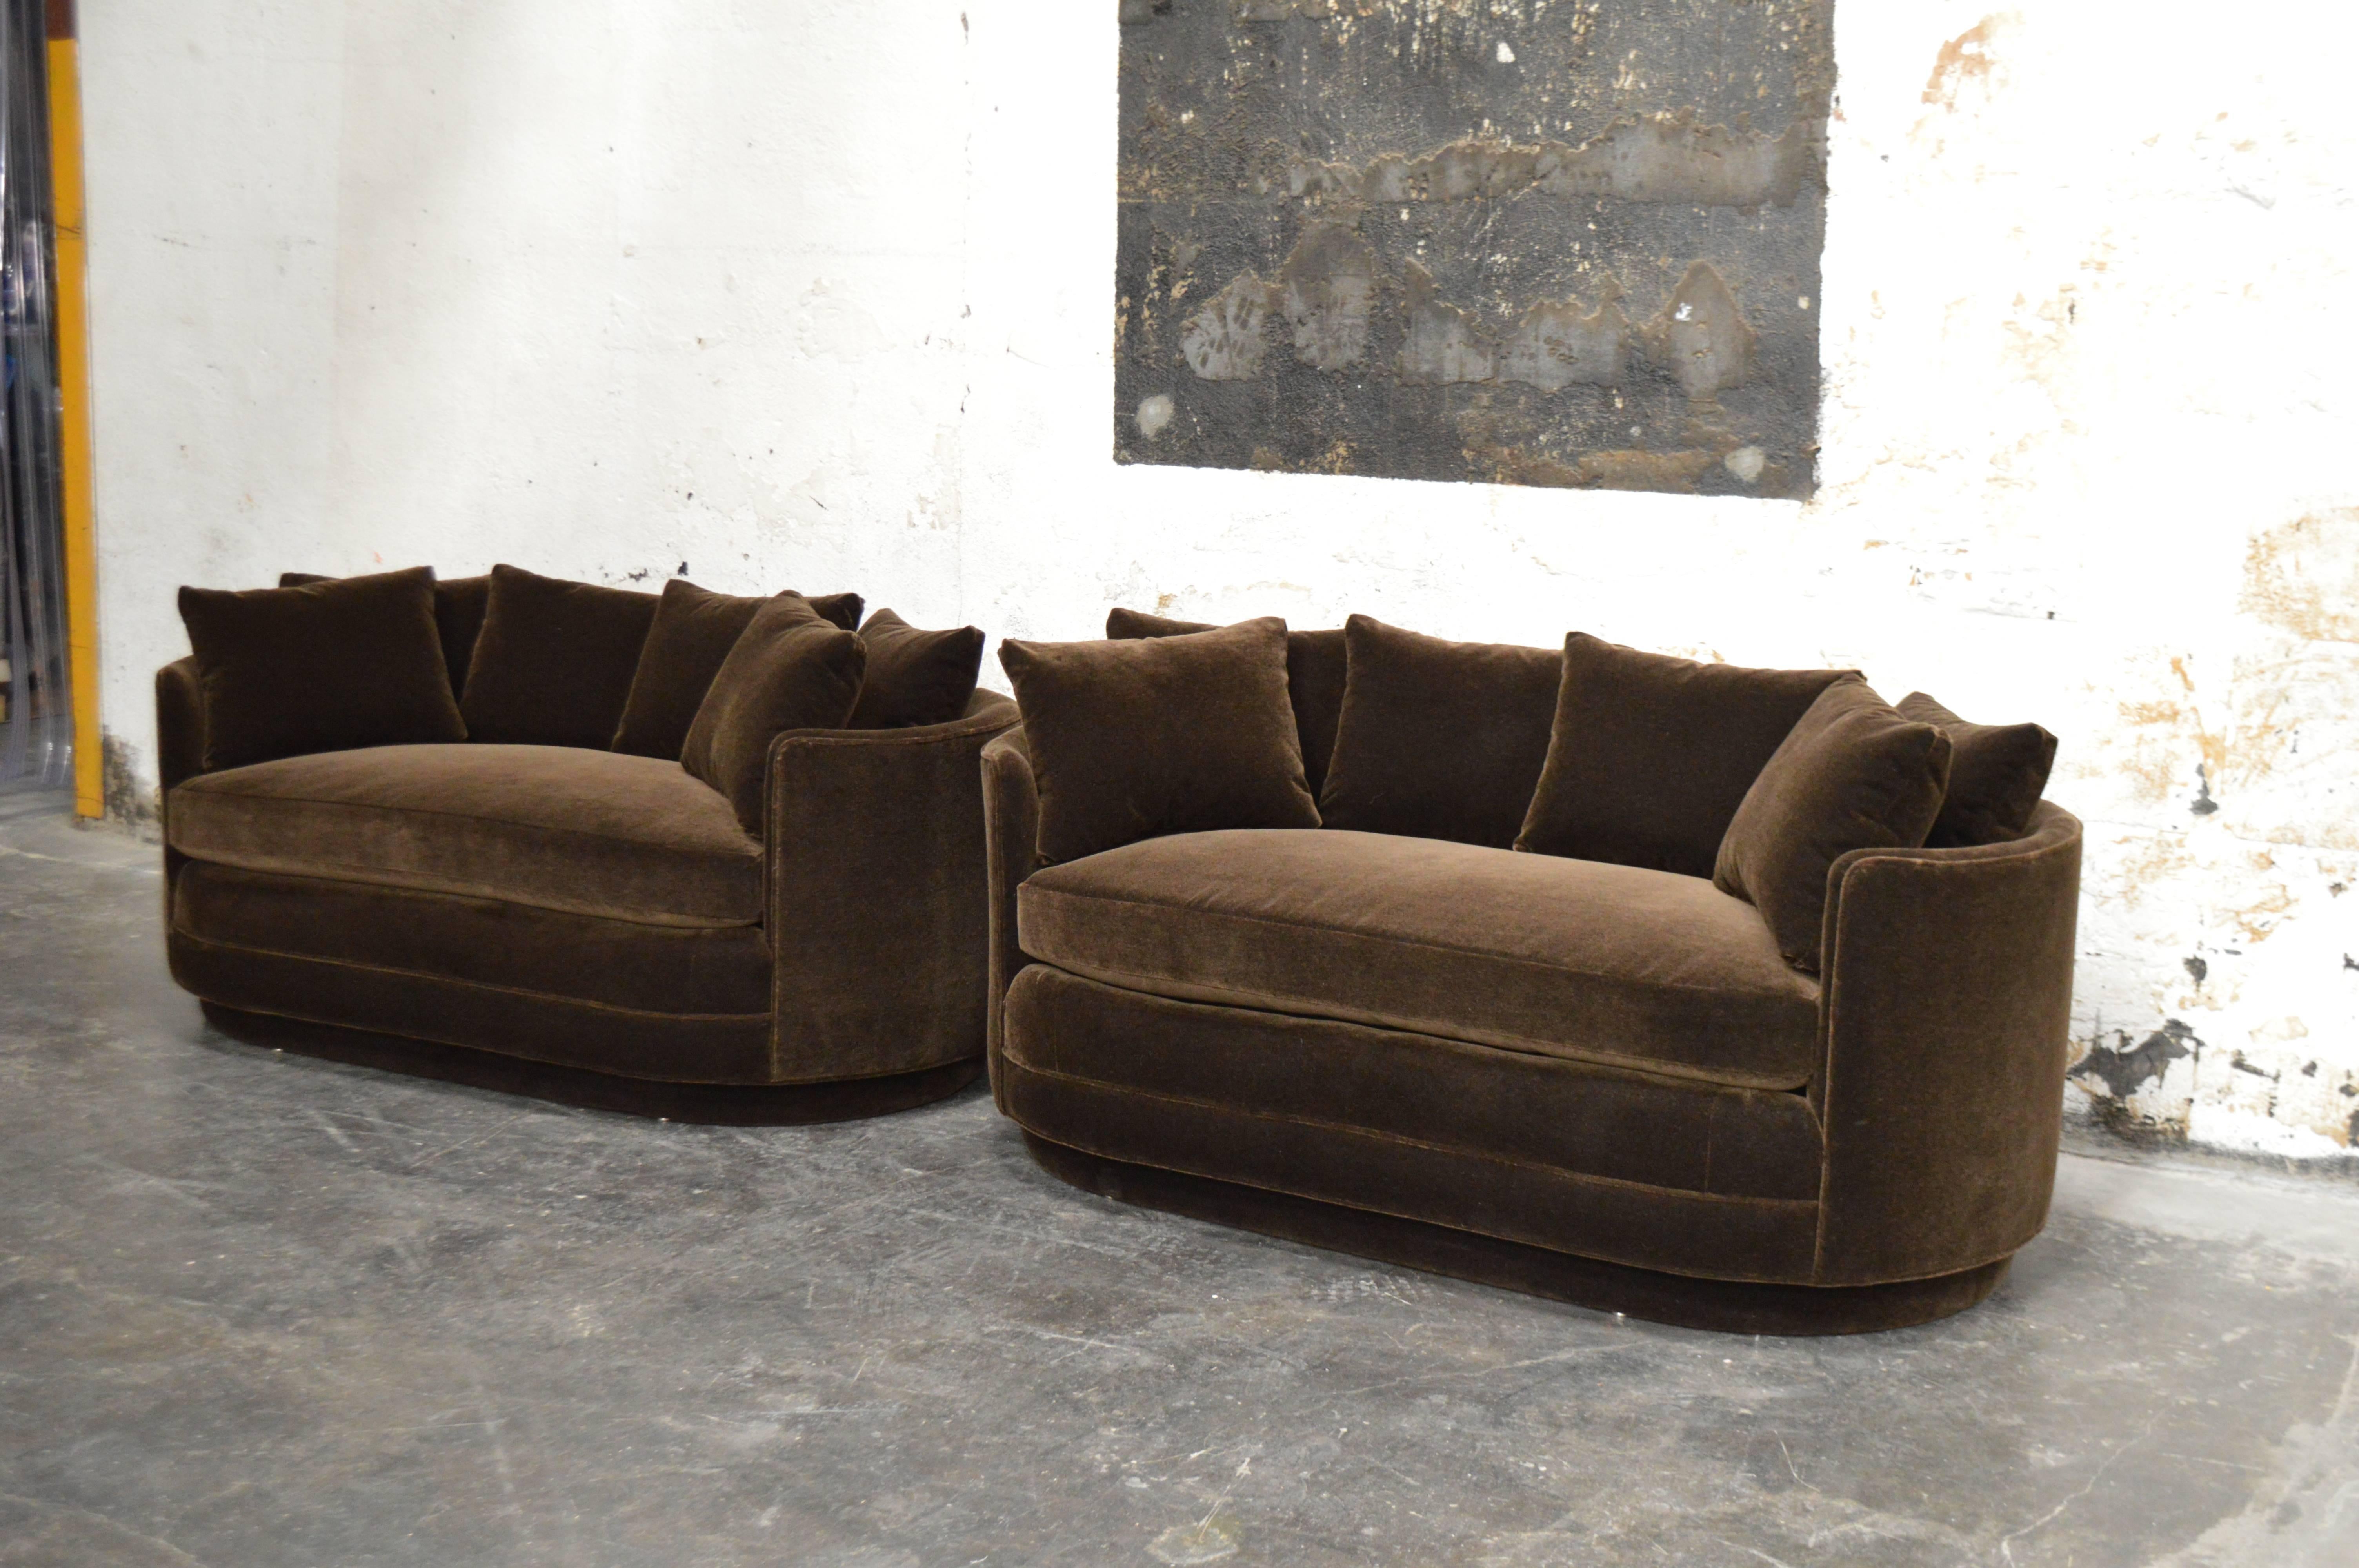 Handsome tailored pair of curved loveseat sofas newly restored and upholstered in a luxurious chocolate brown mohair. Curved pill shape form cozy small-scale sofas with custom back pillows included. 

Note - Sofas appear richer and darker in